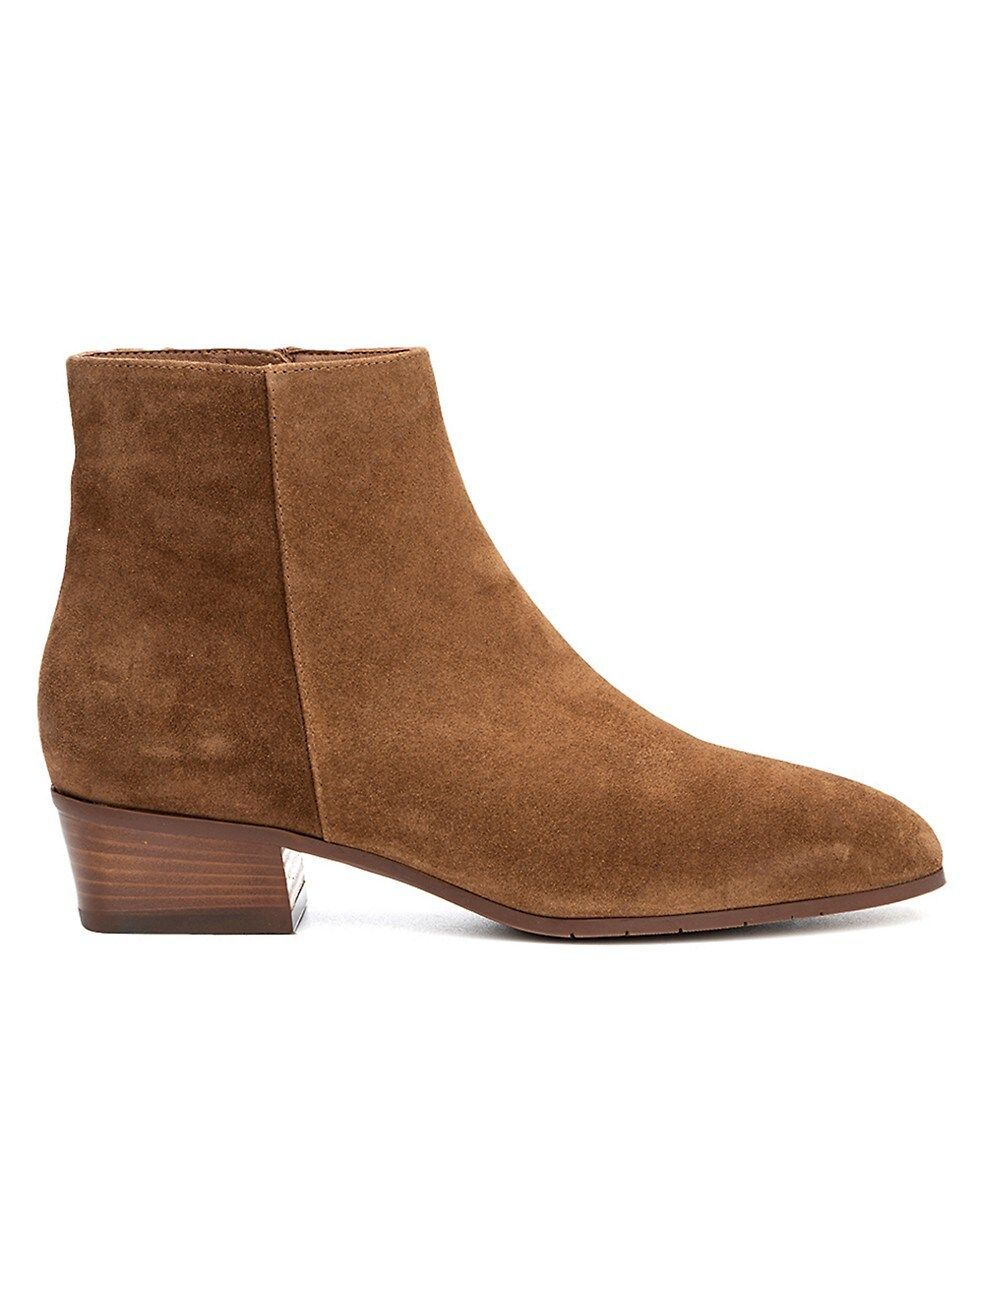 Fuoco Suede Ankle Boots | Saks Fifth Avenue